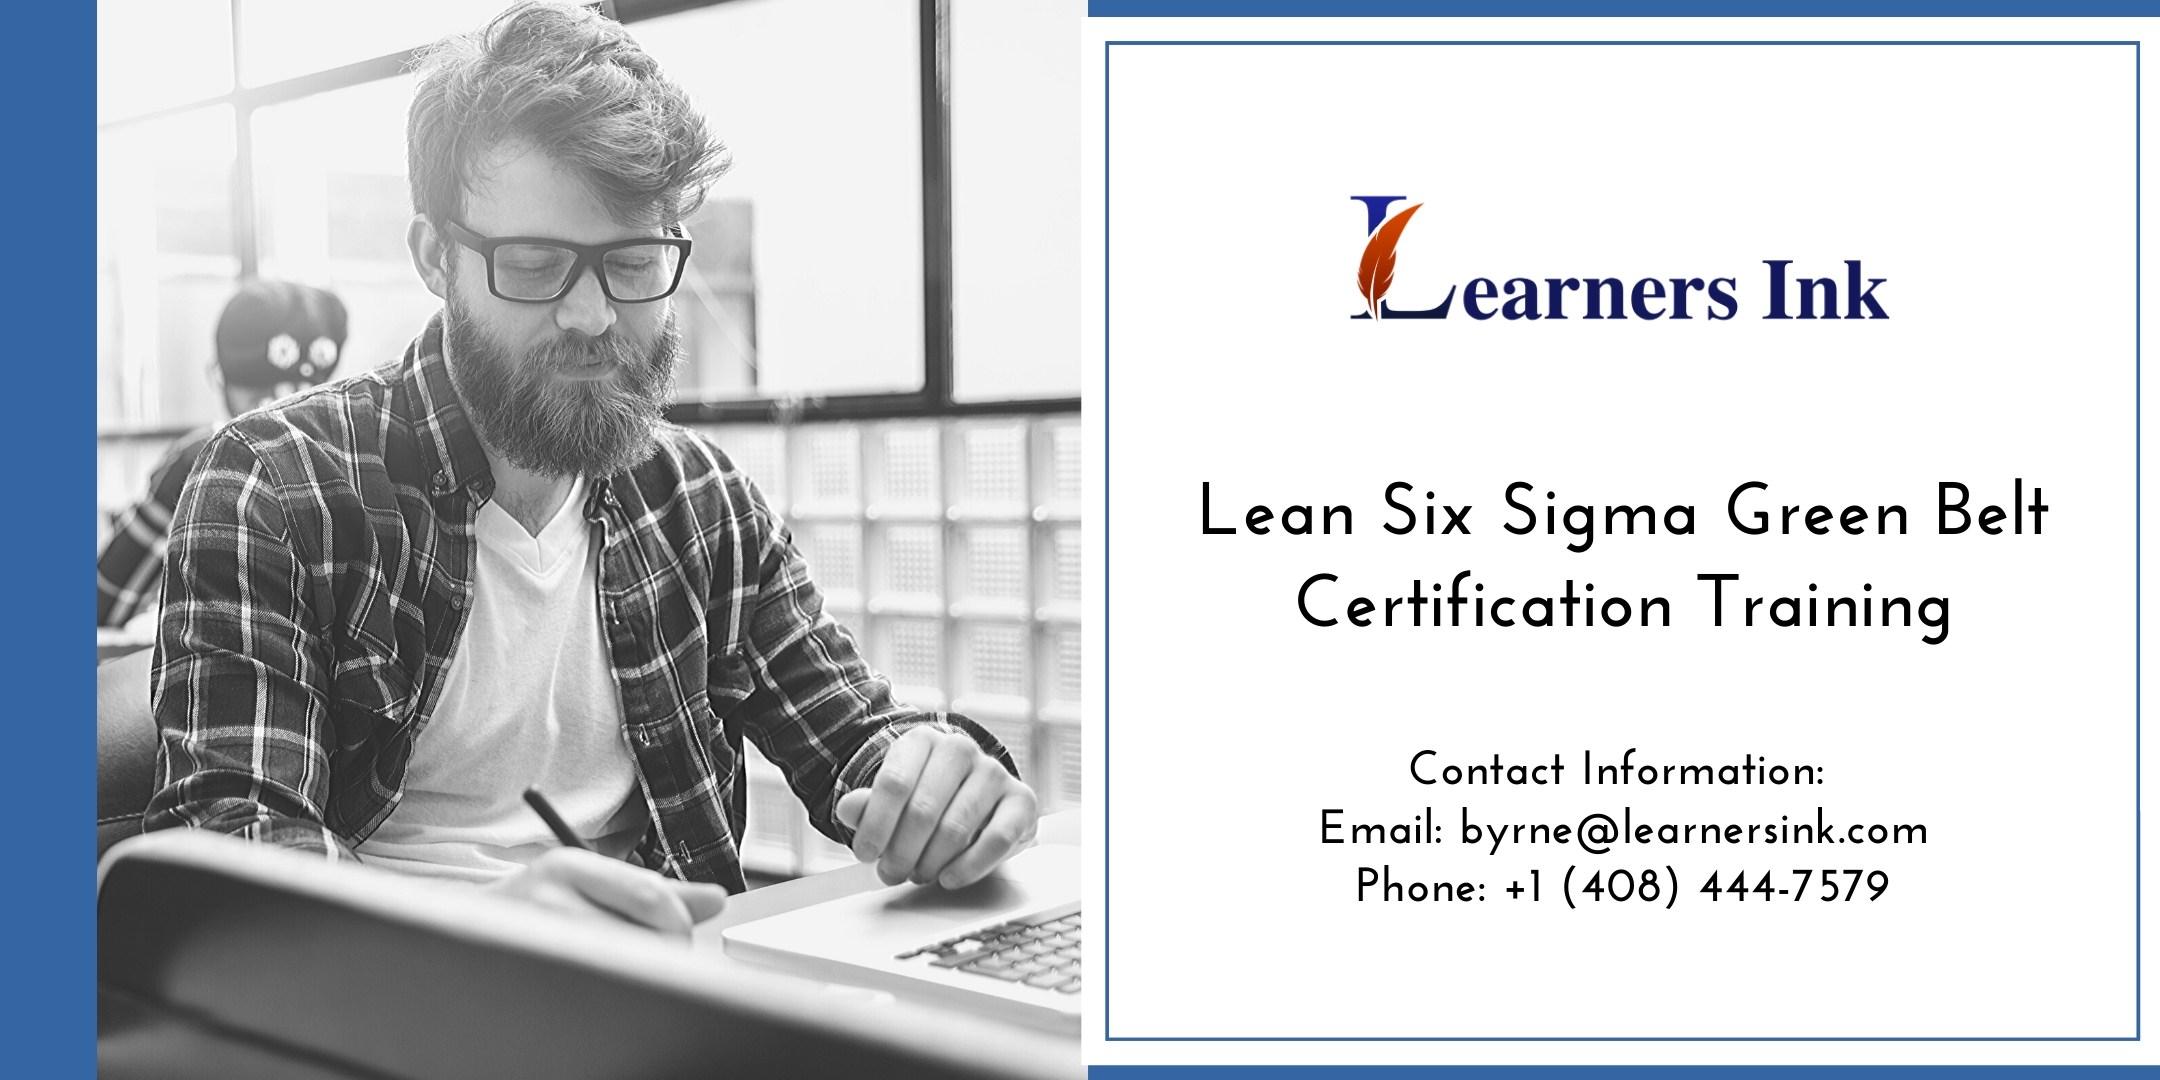 Lean Six Sigma Green Belt Certification Training Course (LSSGB) in Pearland